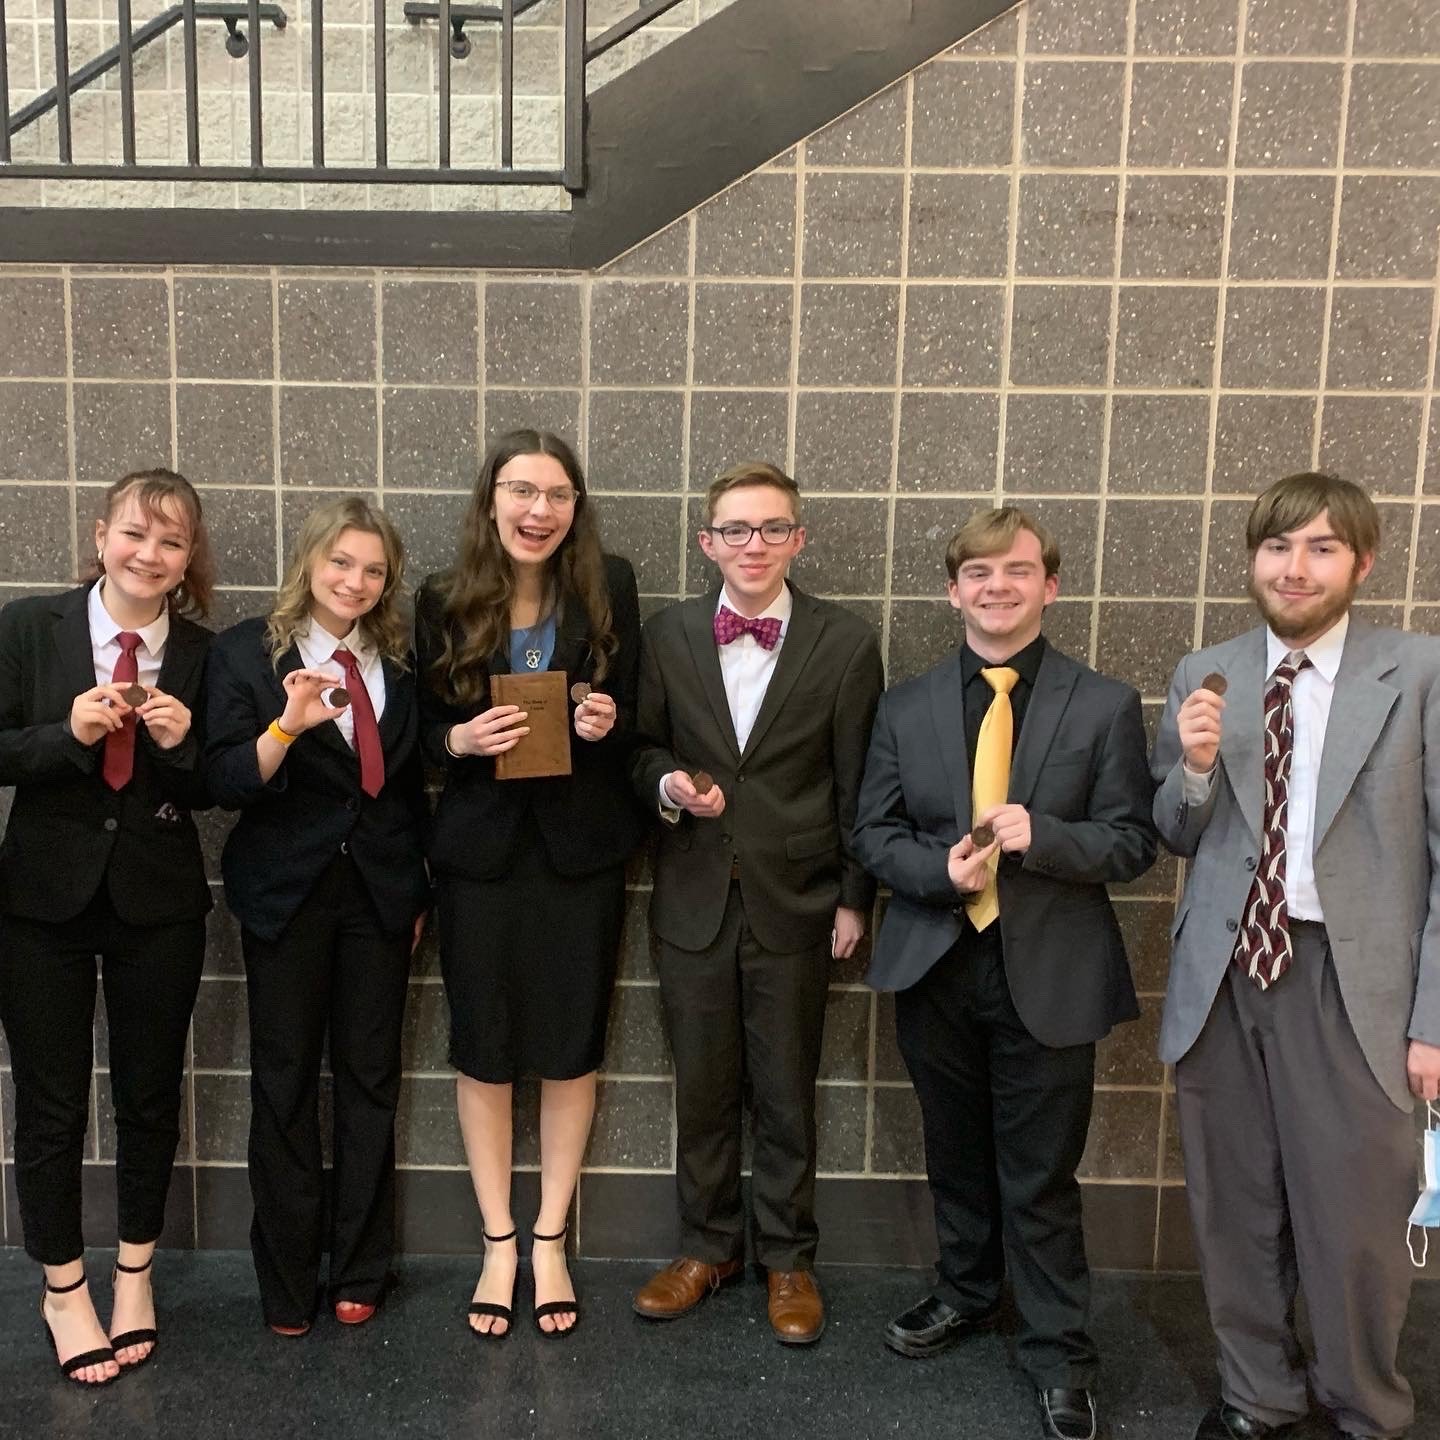 The following students competed in district finals. Pictured are, from left to right, Taygen Morgan and Kayla Phipps (duo interpretation), Rachel Marsch (storytelling), Jackson Cornell (original oratory), Robert Clark (radio speaking, state qualifier), and Tanner Wilson (U.S. extemporaneous speaking).